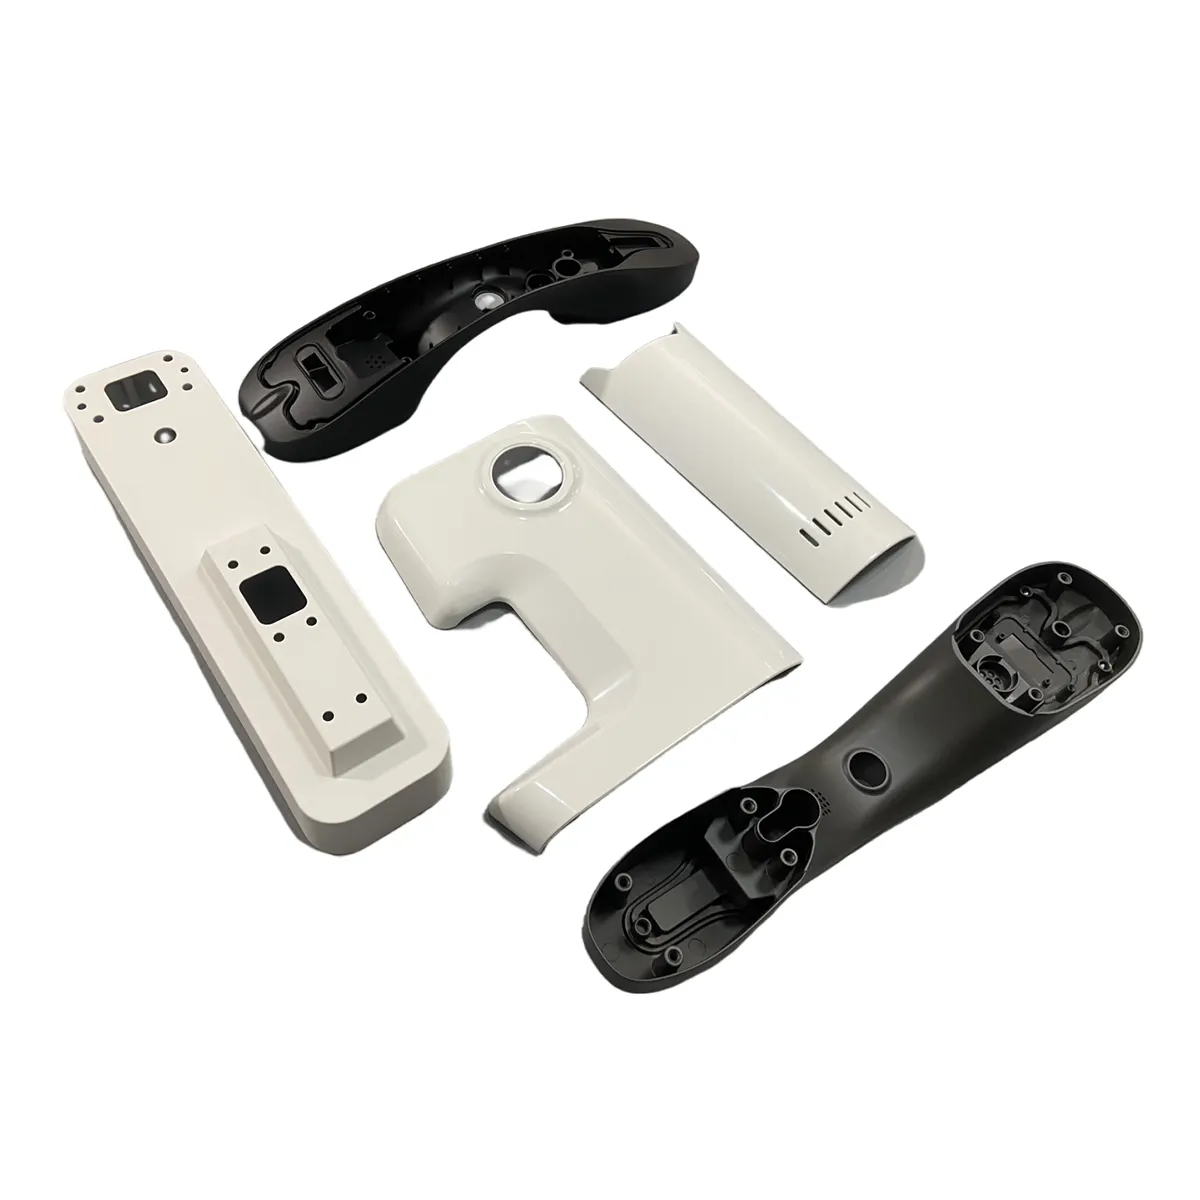 Pull-Assortiment Auto-Accessoires Fabrikant Auto-Onderdelen Voor Gac Gs3/Gs4/Gs5/Gs7/Gs8/Ga3/Ga5/Ga6/Ga8/Ge3/Gm6/Gm8/Gn6/Gn6/Gn8